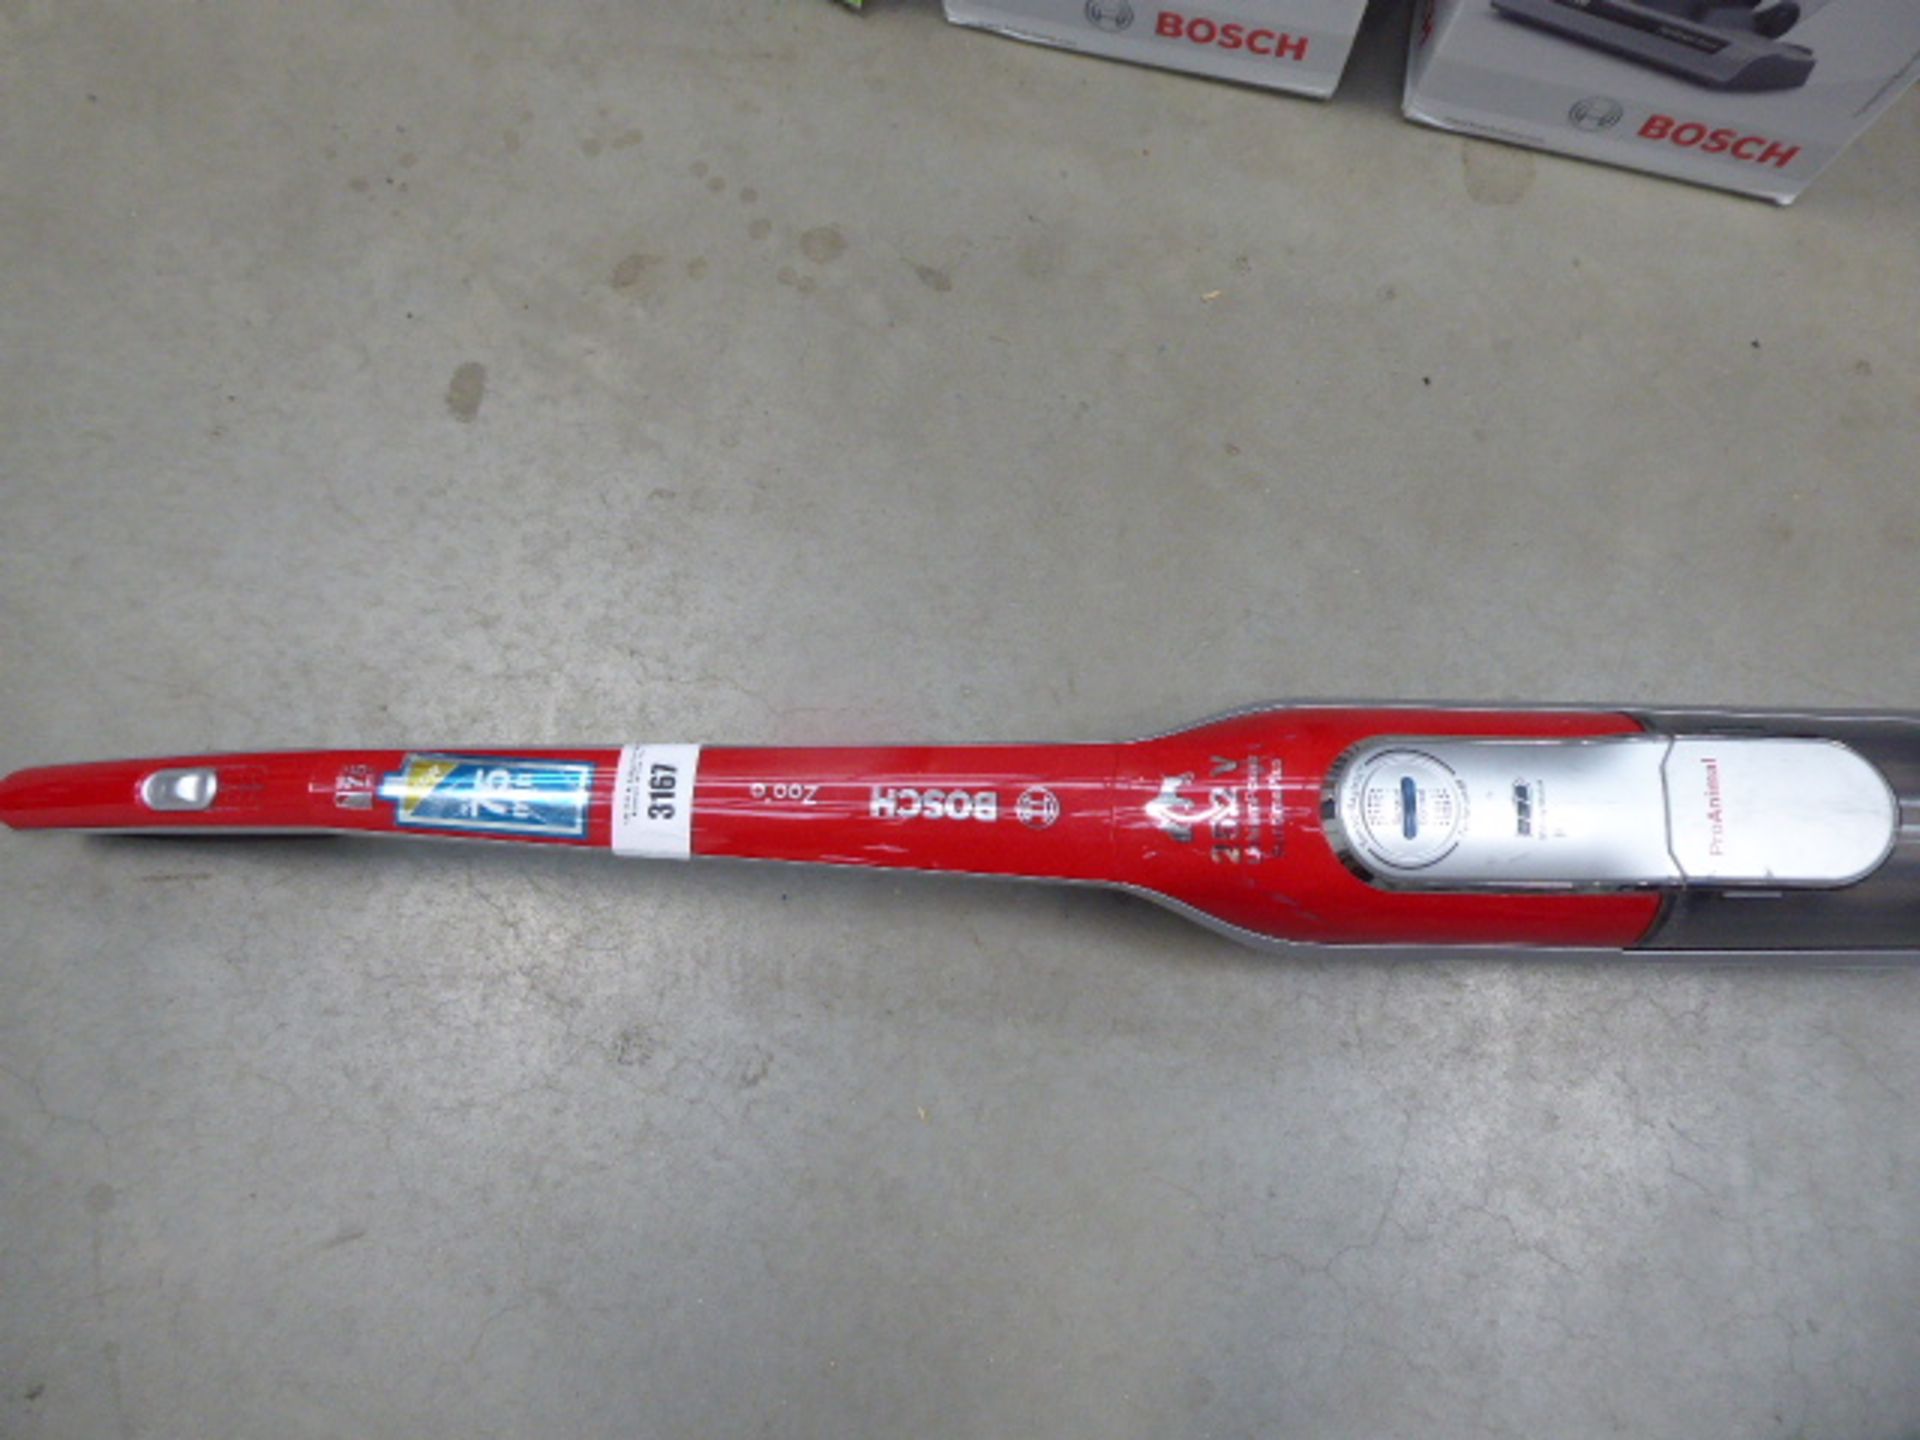 3251 - One upright 25.2v cordless Bosch vacuum cleaner (no charger) - Image 2 of 2